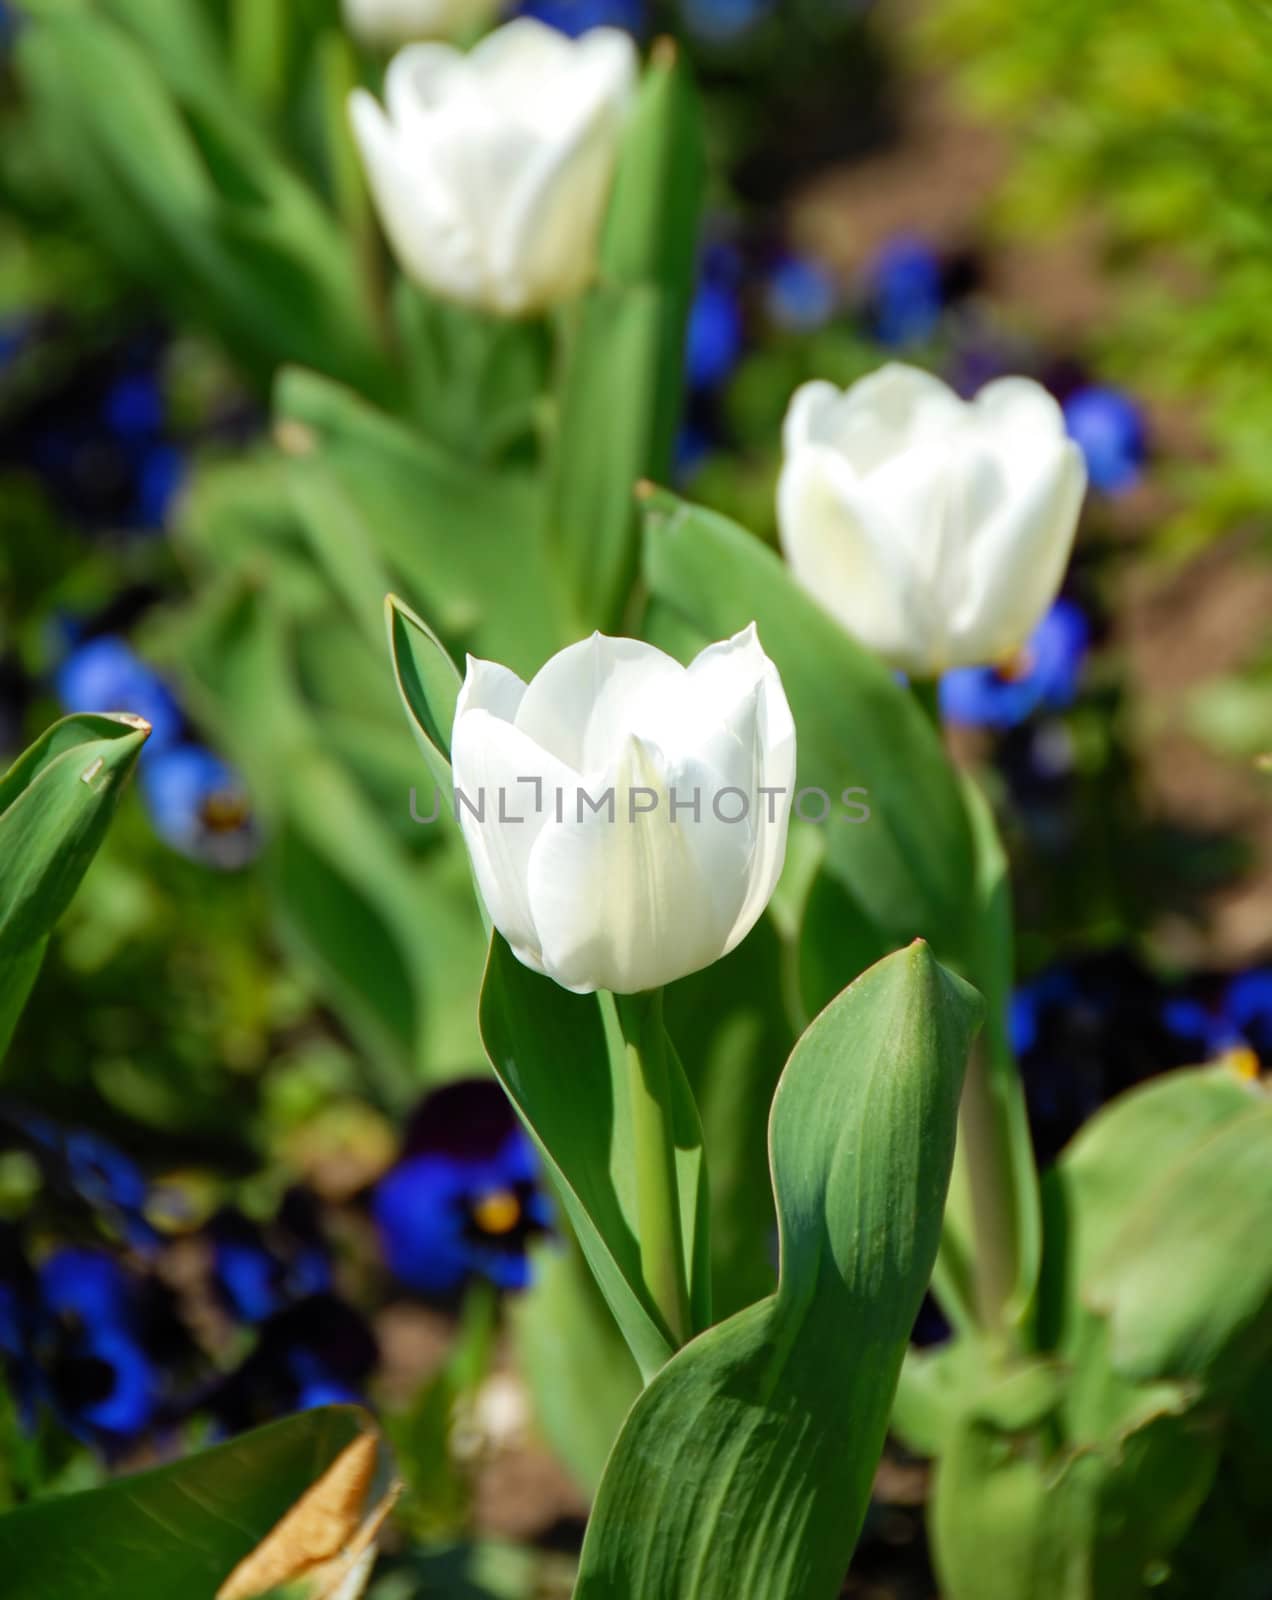 white blooming tulips outdoor on flowerbed at spring